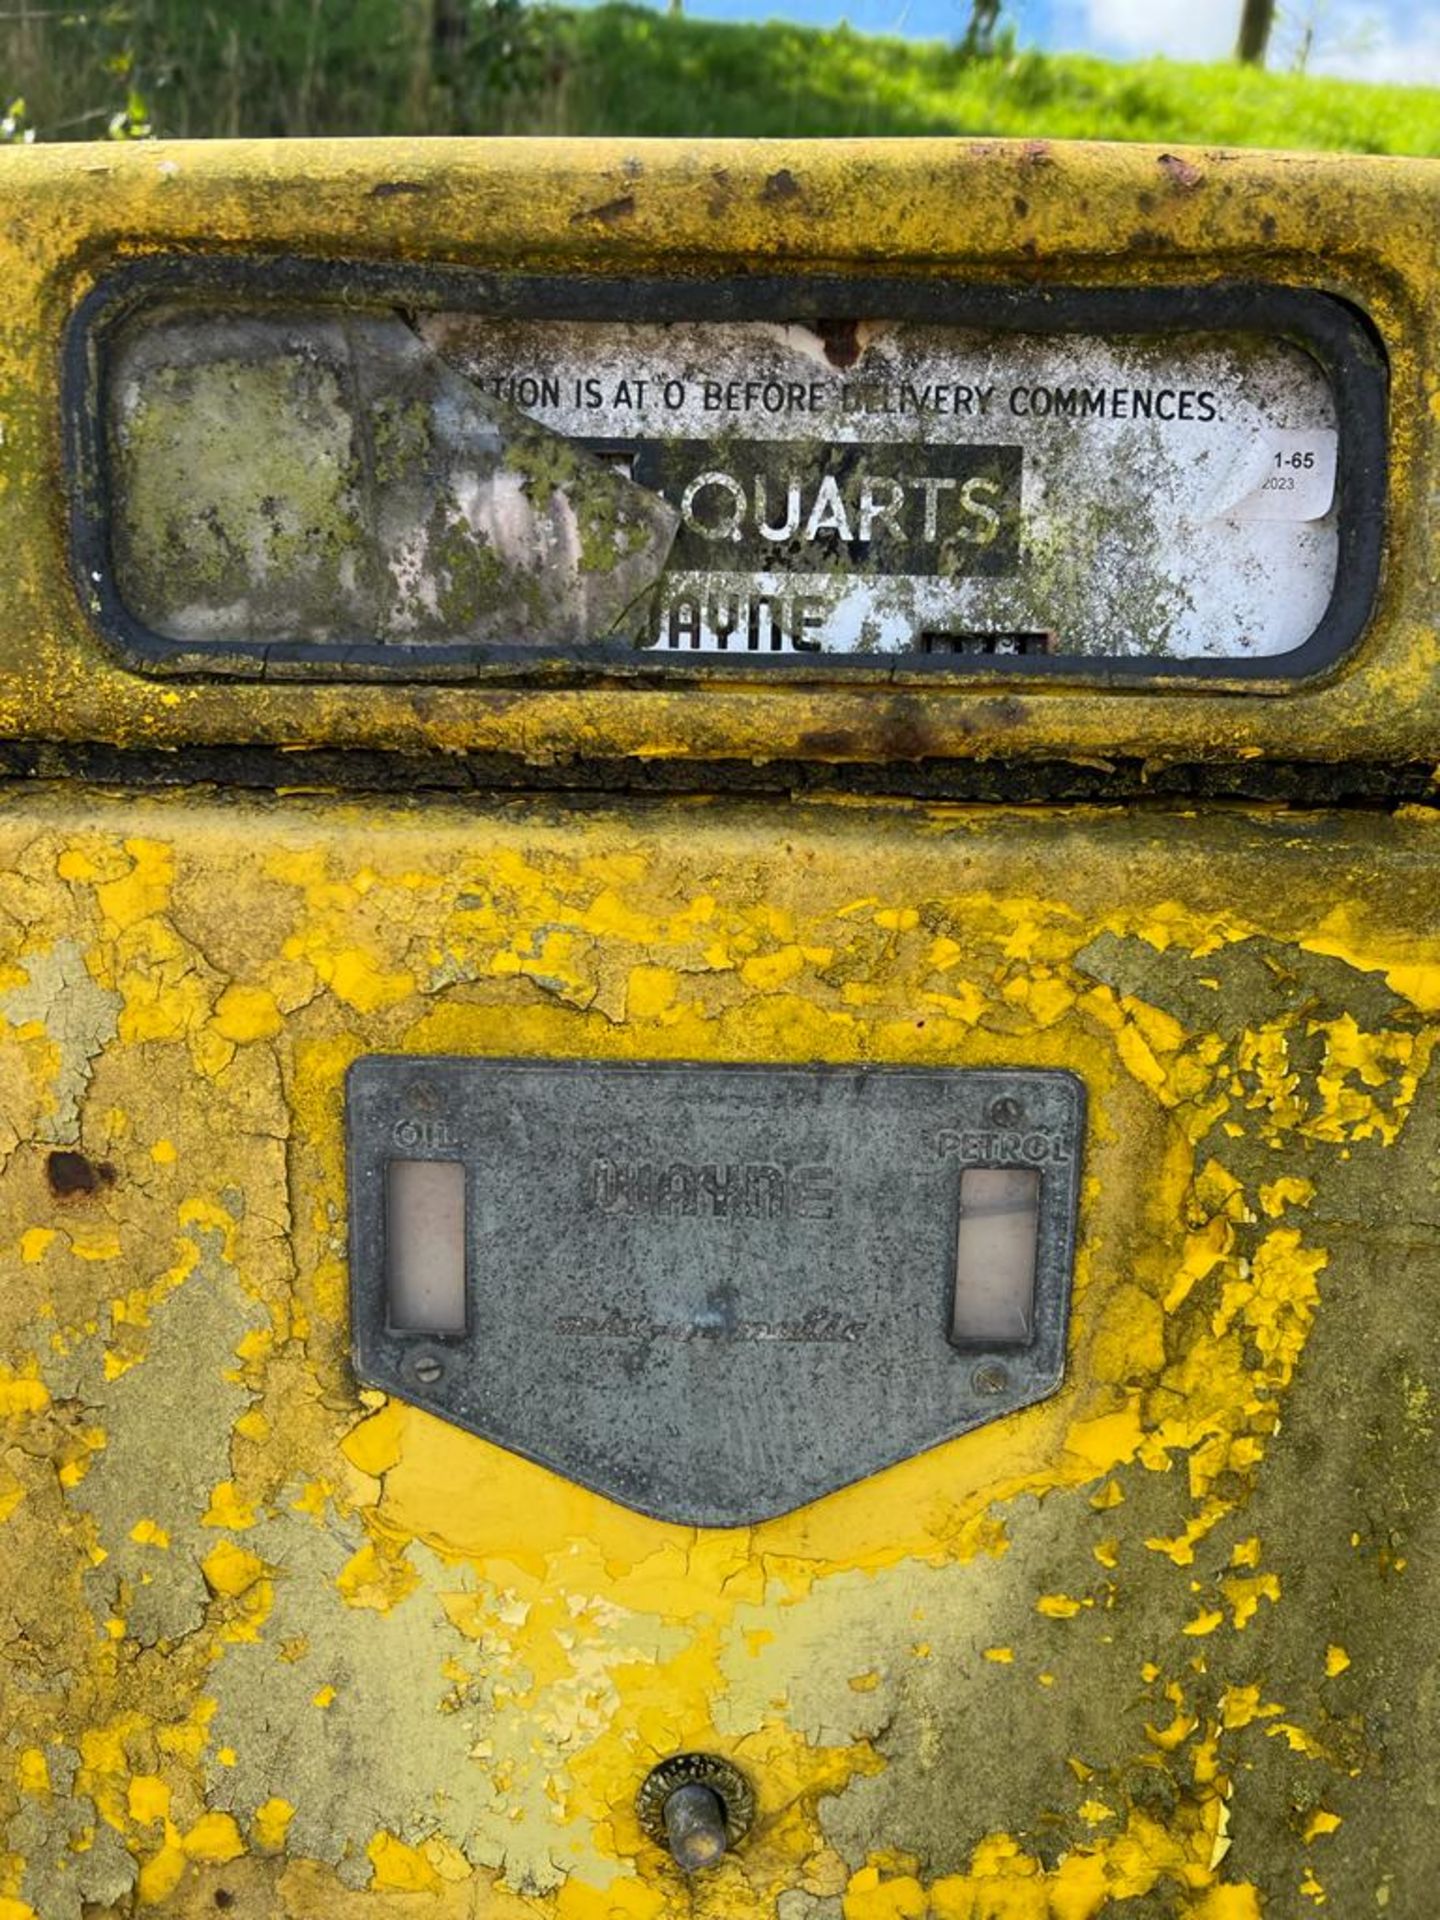 A vintage Shell 2T petrol pump in barn find condition. - Image 6 of 7